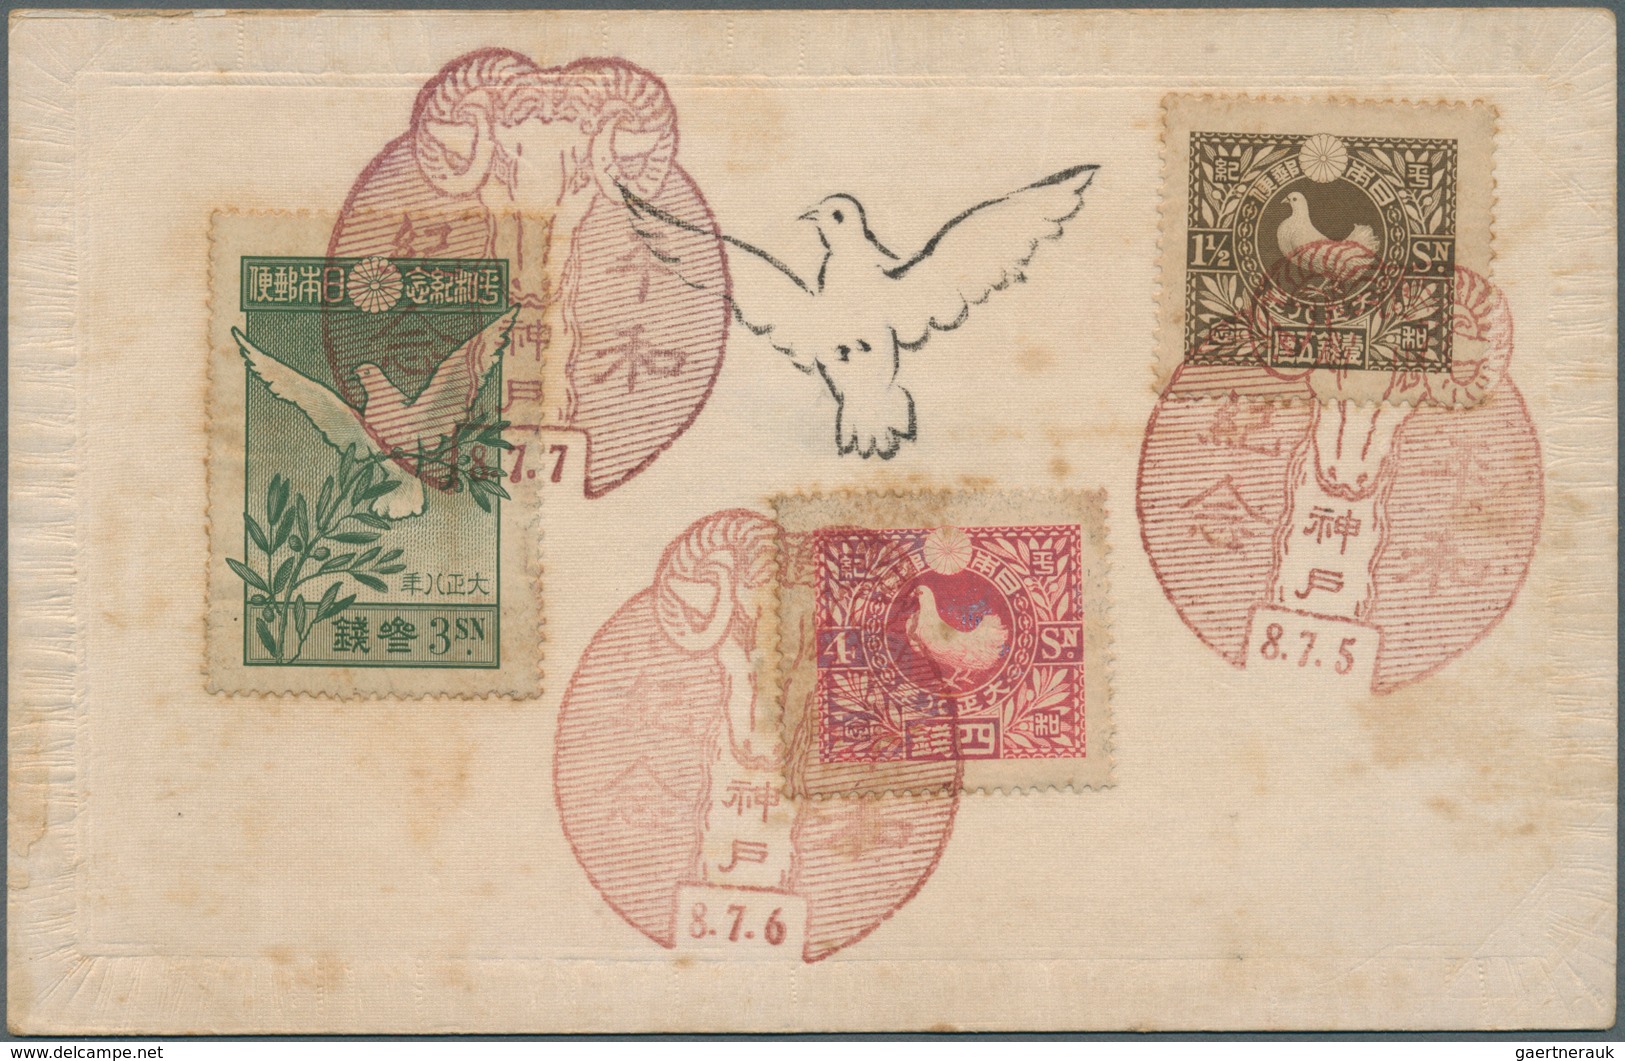 29465 Japan: 1902/29, official (mostly) ppc mint/cto (23) several with embossing, resp. folders (2). Also